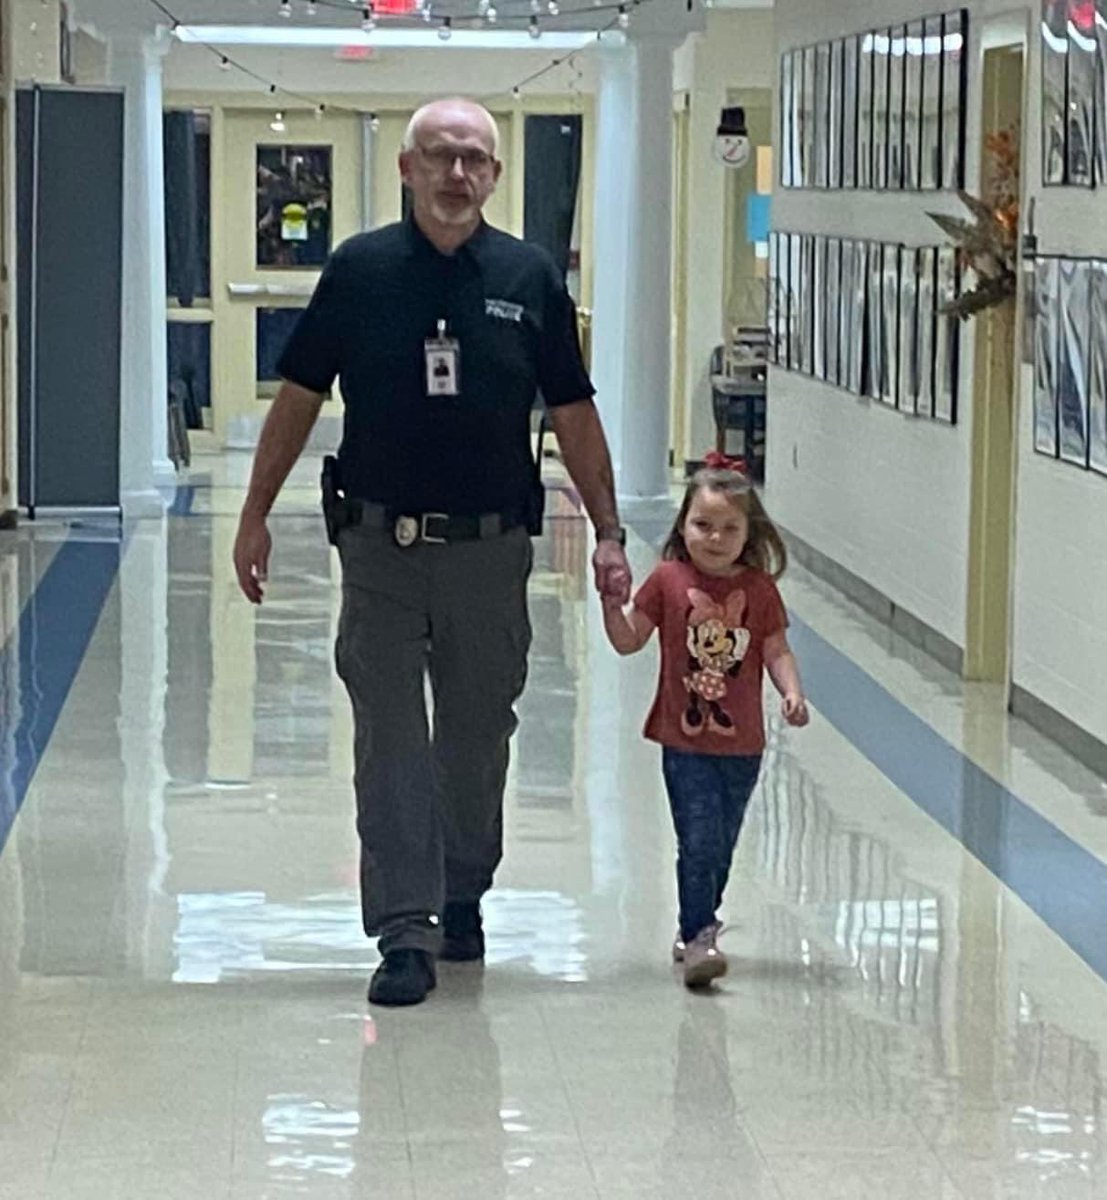 We are so thankful to have Mr. Johnny Layne as our SRO. Not only does he give our school a sense of security, but he’s already made such a positive impact on our students. ❤️💙👮🏼‍♂️